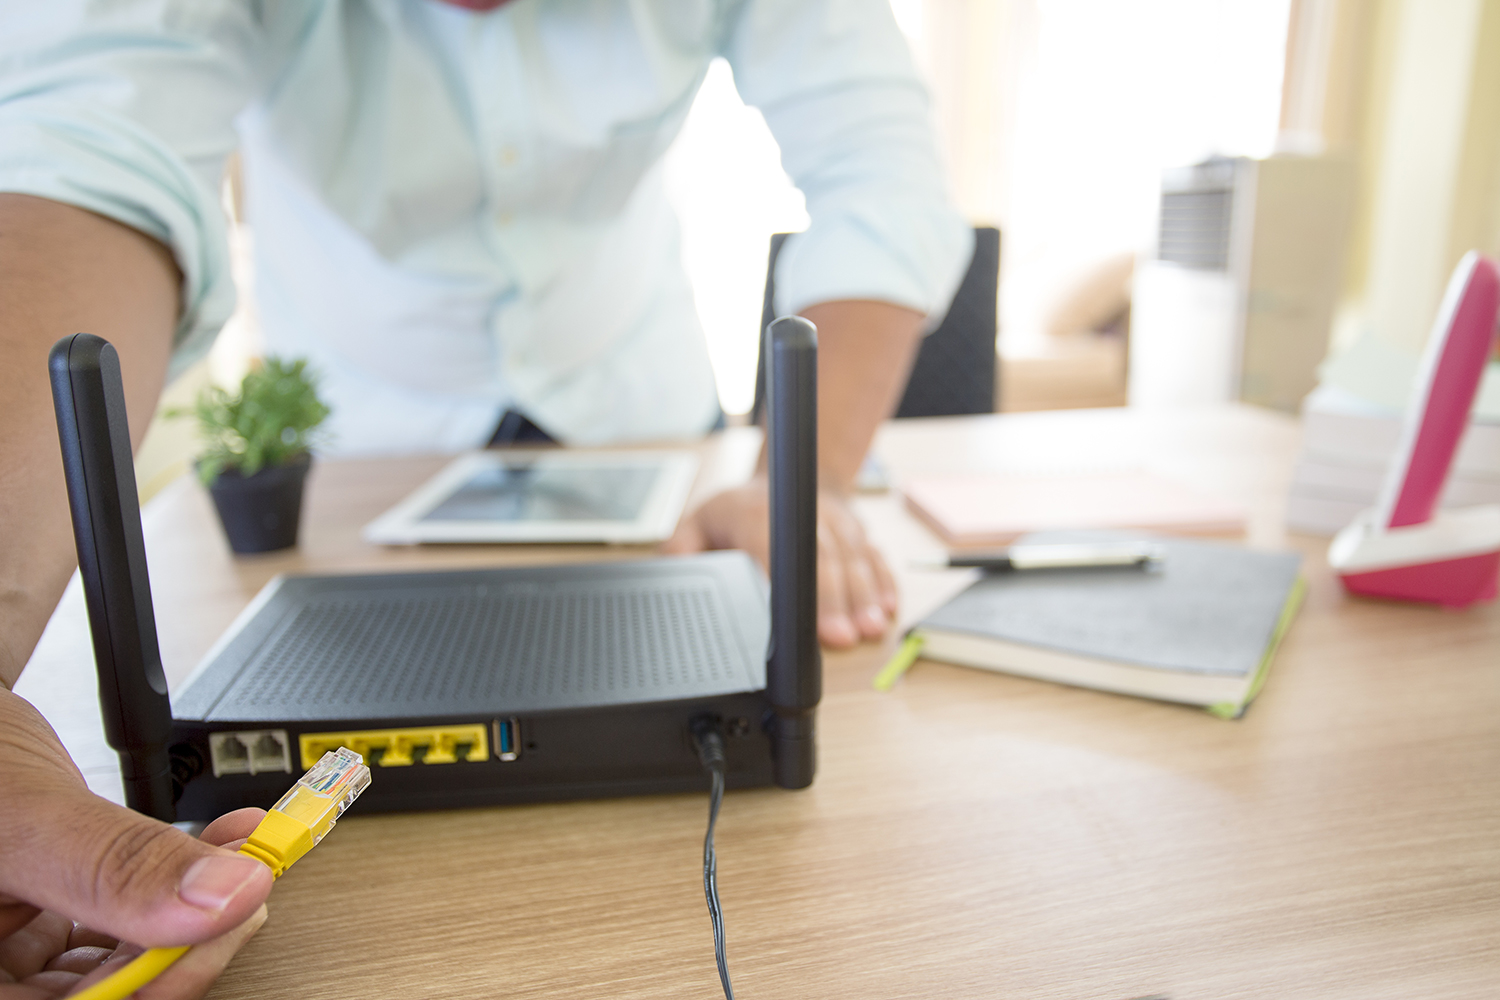 Does ethernet cable slow down WiFi? Your questions answered